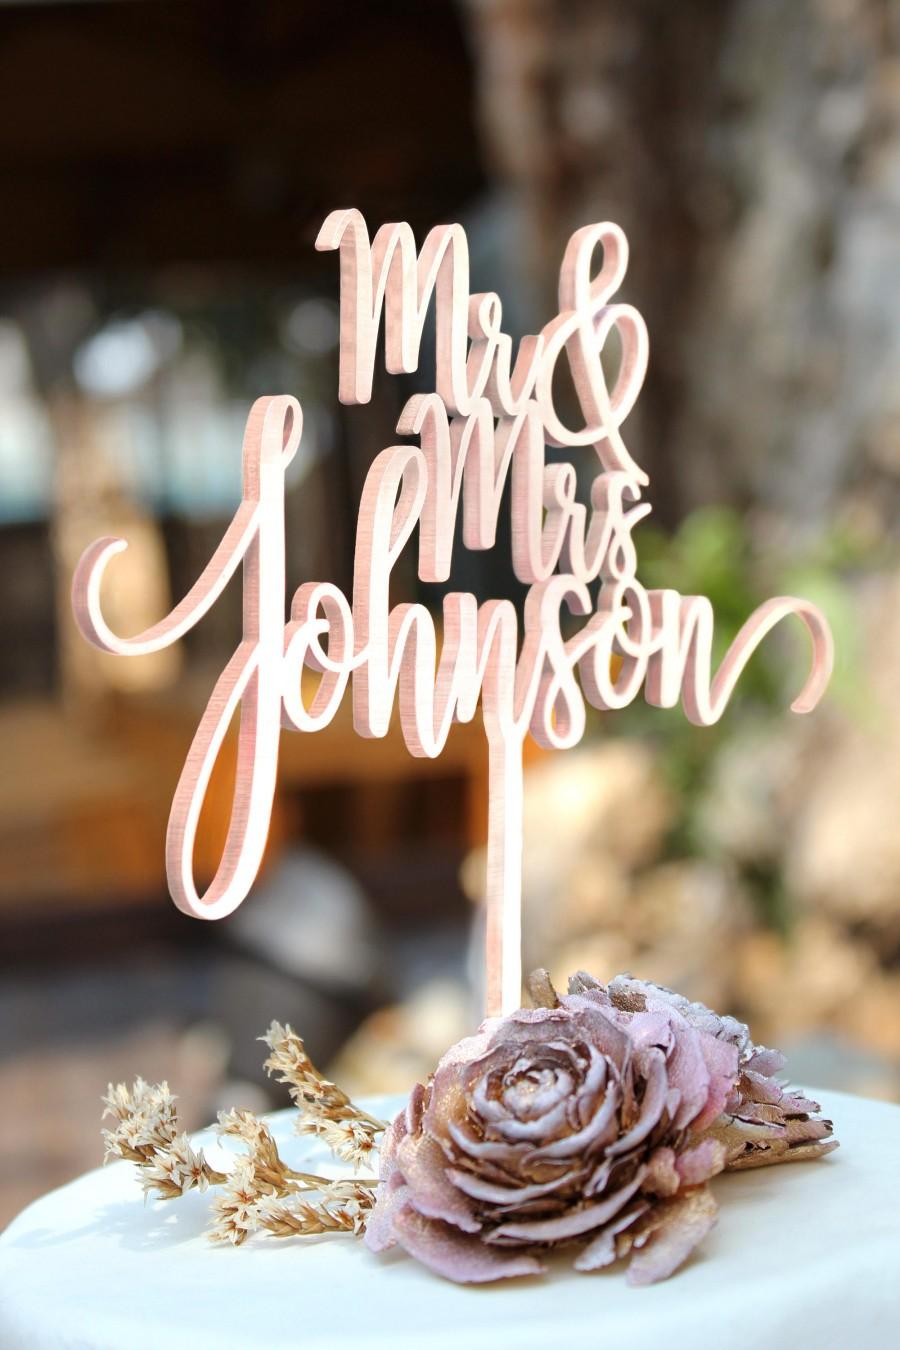 Wedding - Personalized Cake Topper for Wedding, Custom Personalized Wedding Cake Topper, Customized Wedding Cake Topper, Mr and Mrs Cake Topper 29